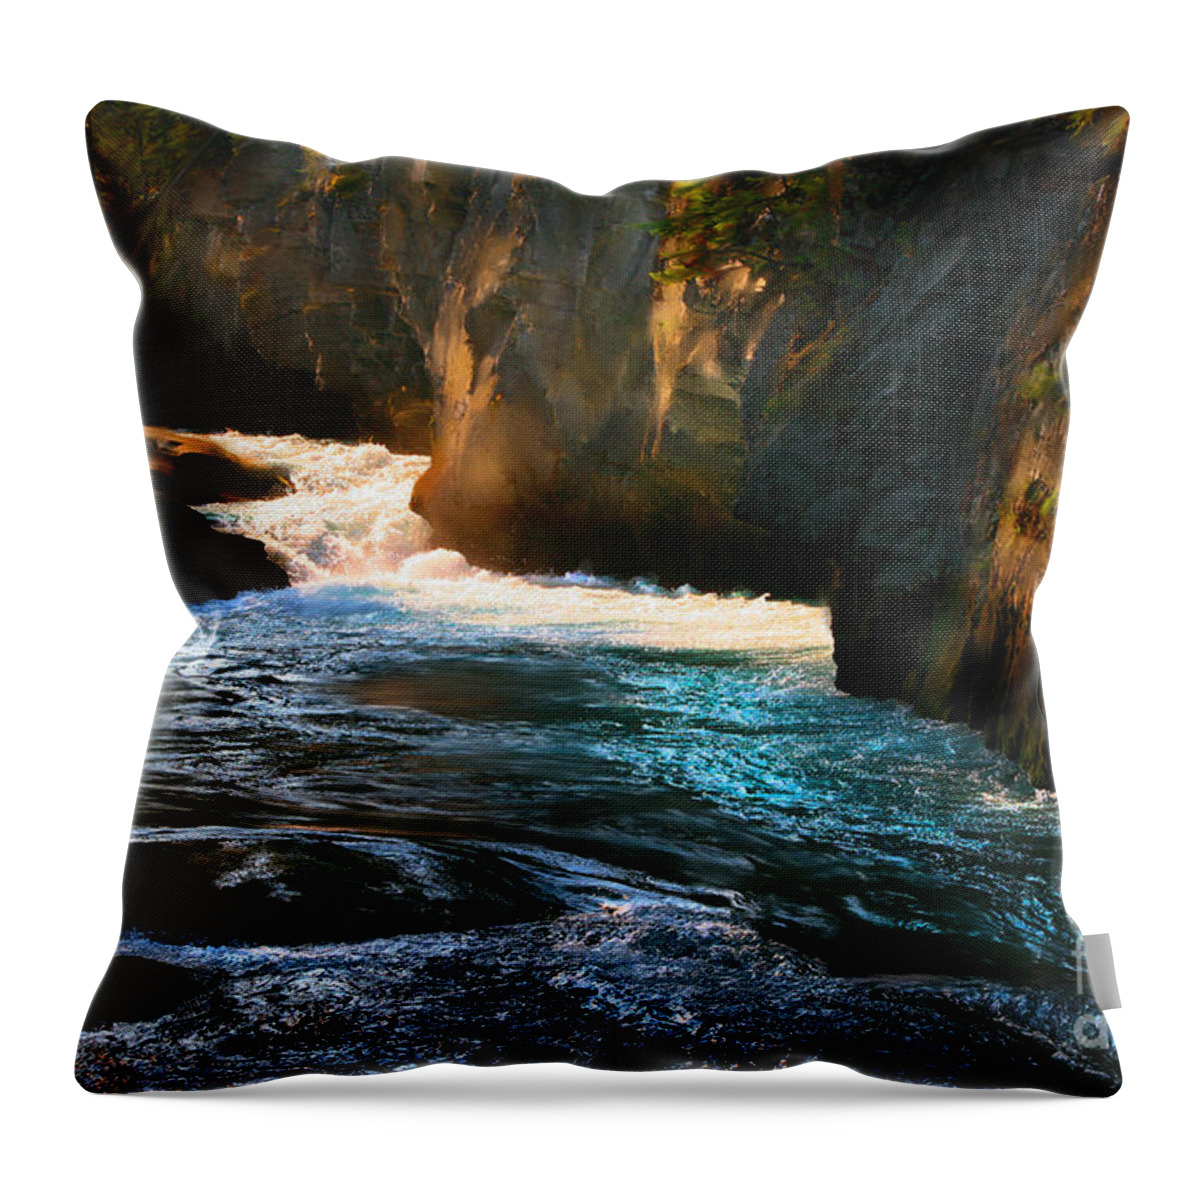 Landscape Throw Pillow featuring the photograph Fifth Bridge Canada by Lisa Redfern